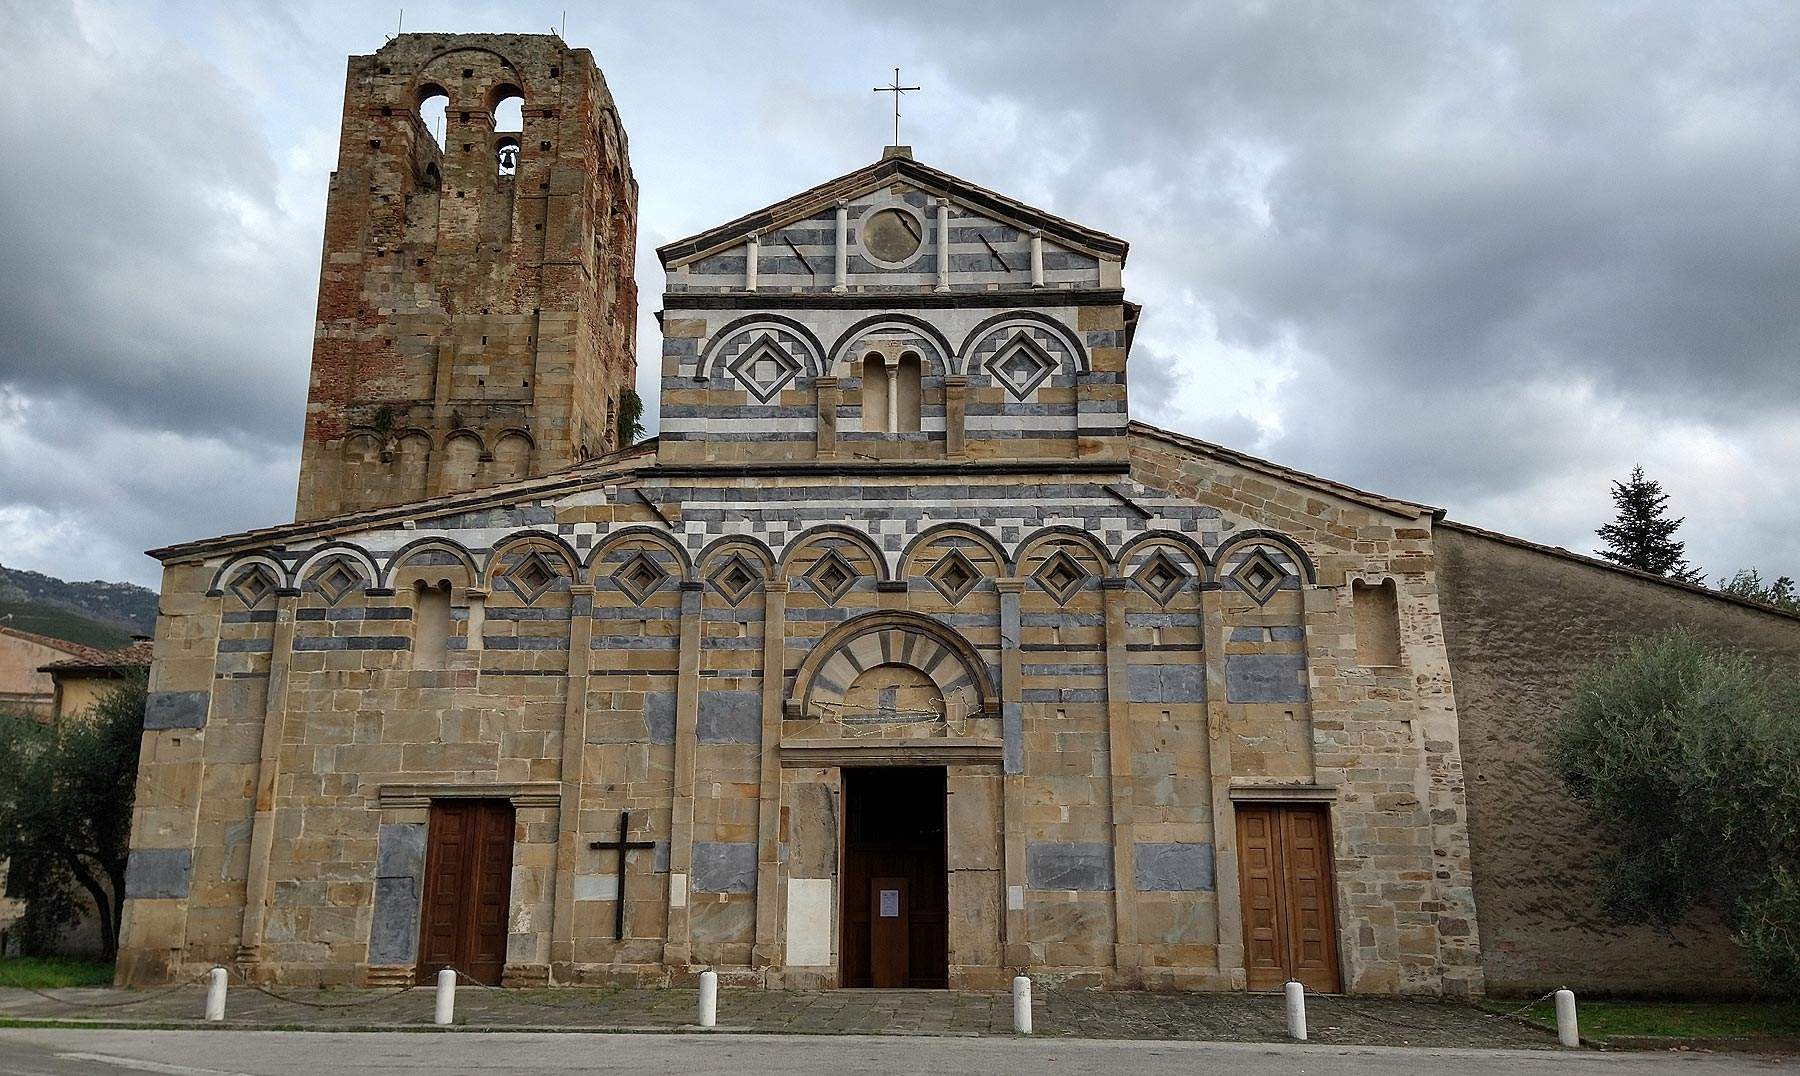 Calci, from the splendors and rigors of the Charterhouse to the marbles of the Romanesque parish church